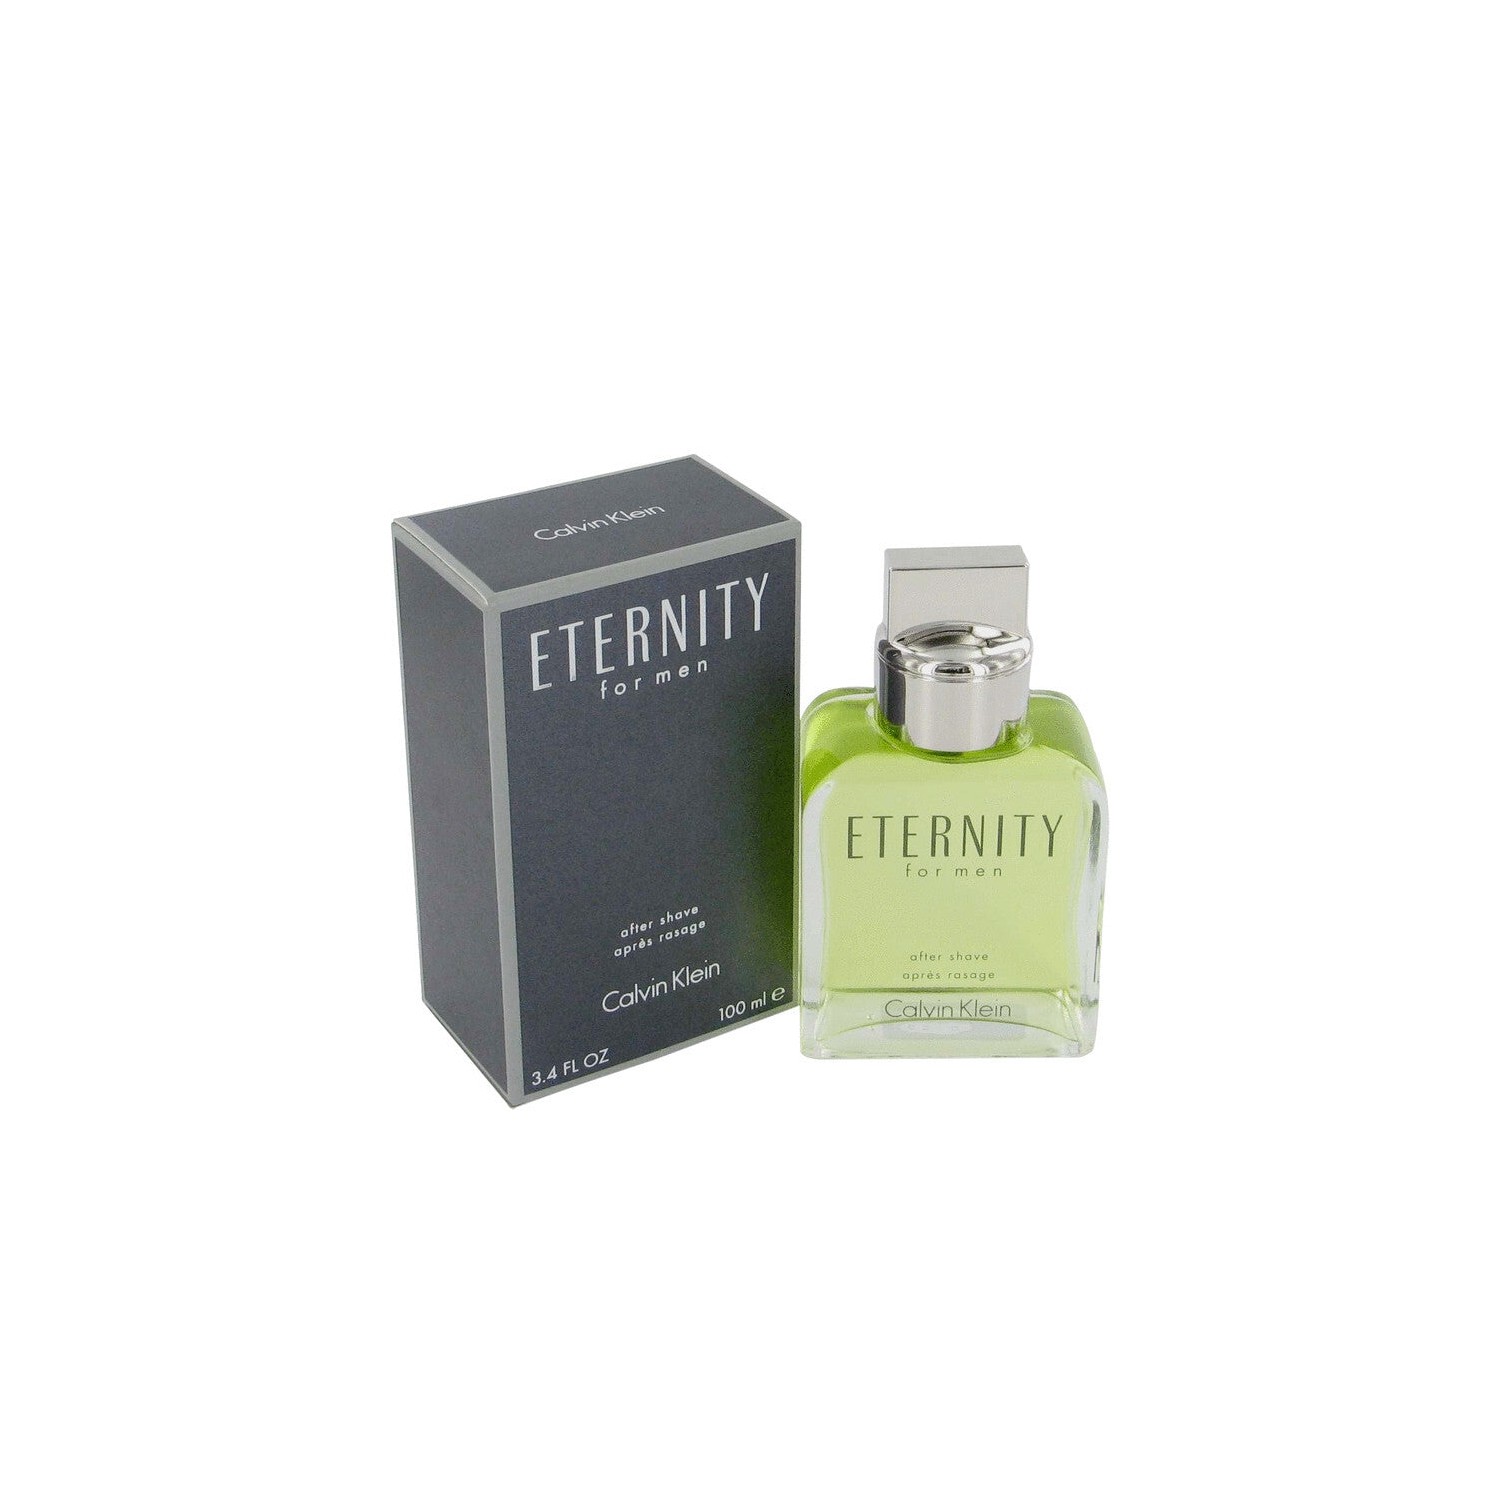 ETERNITY by Calvin Klein After Shave 3.4 oz